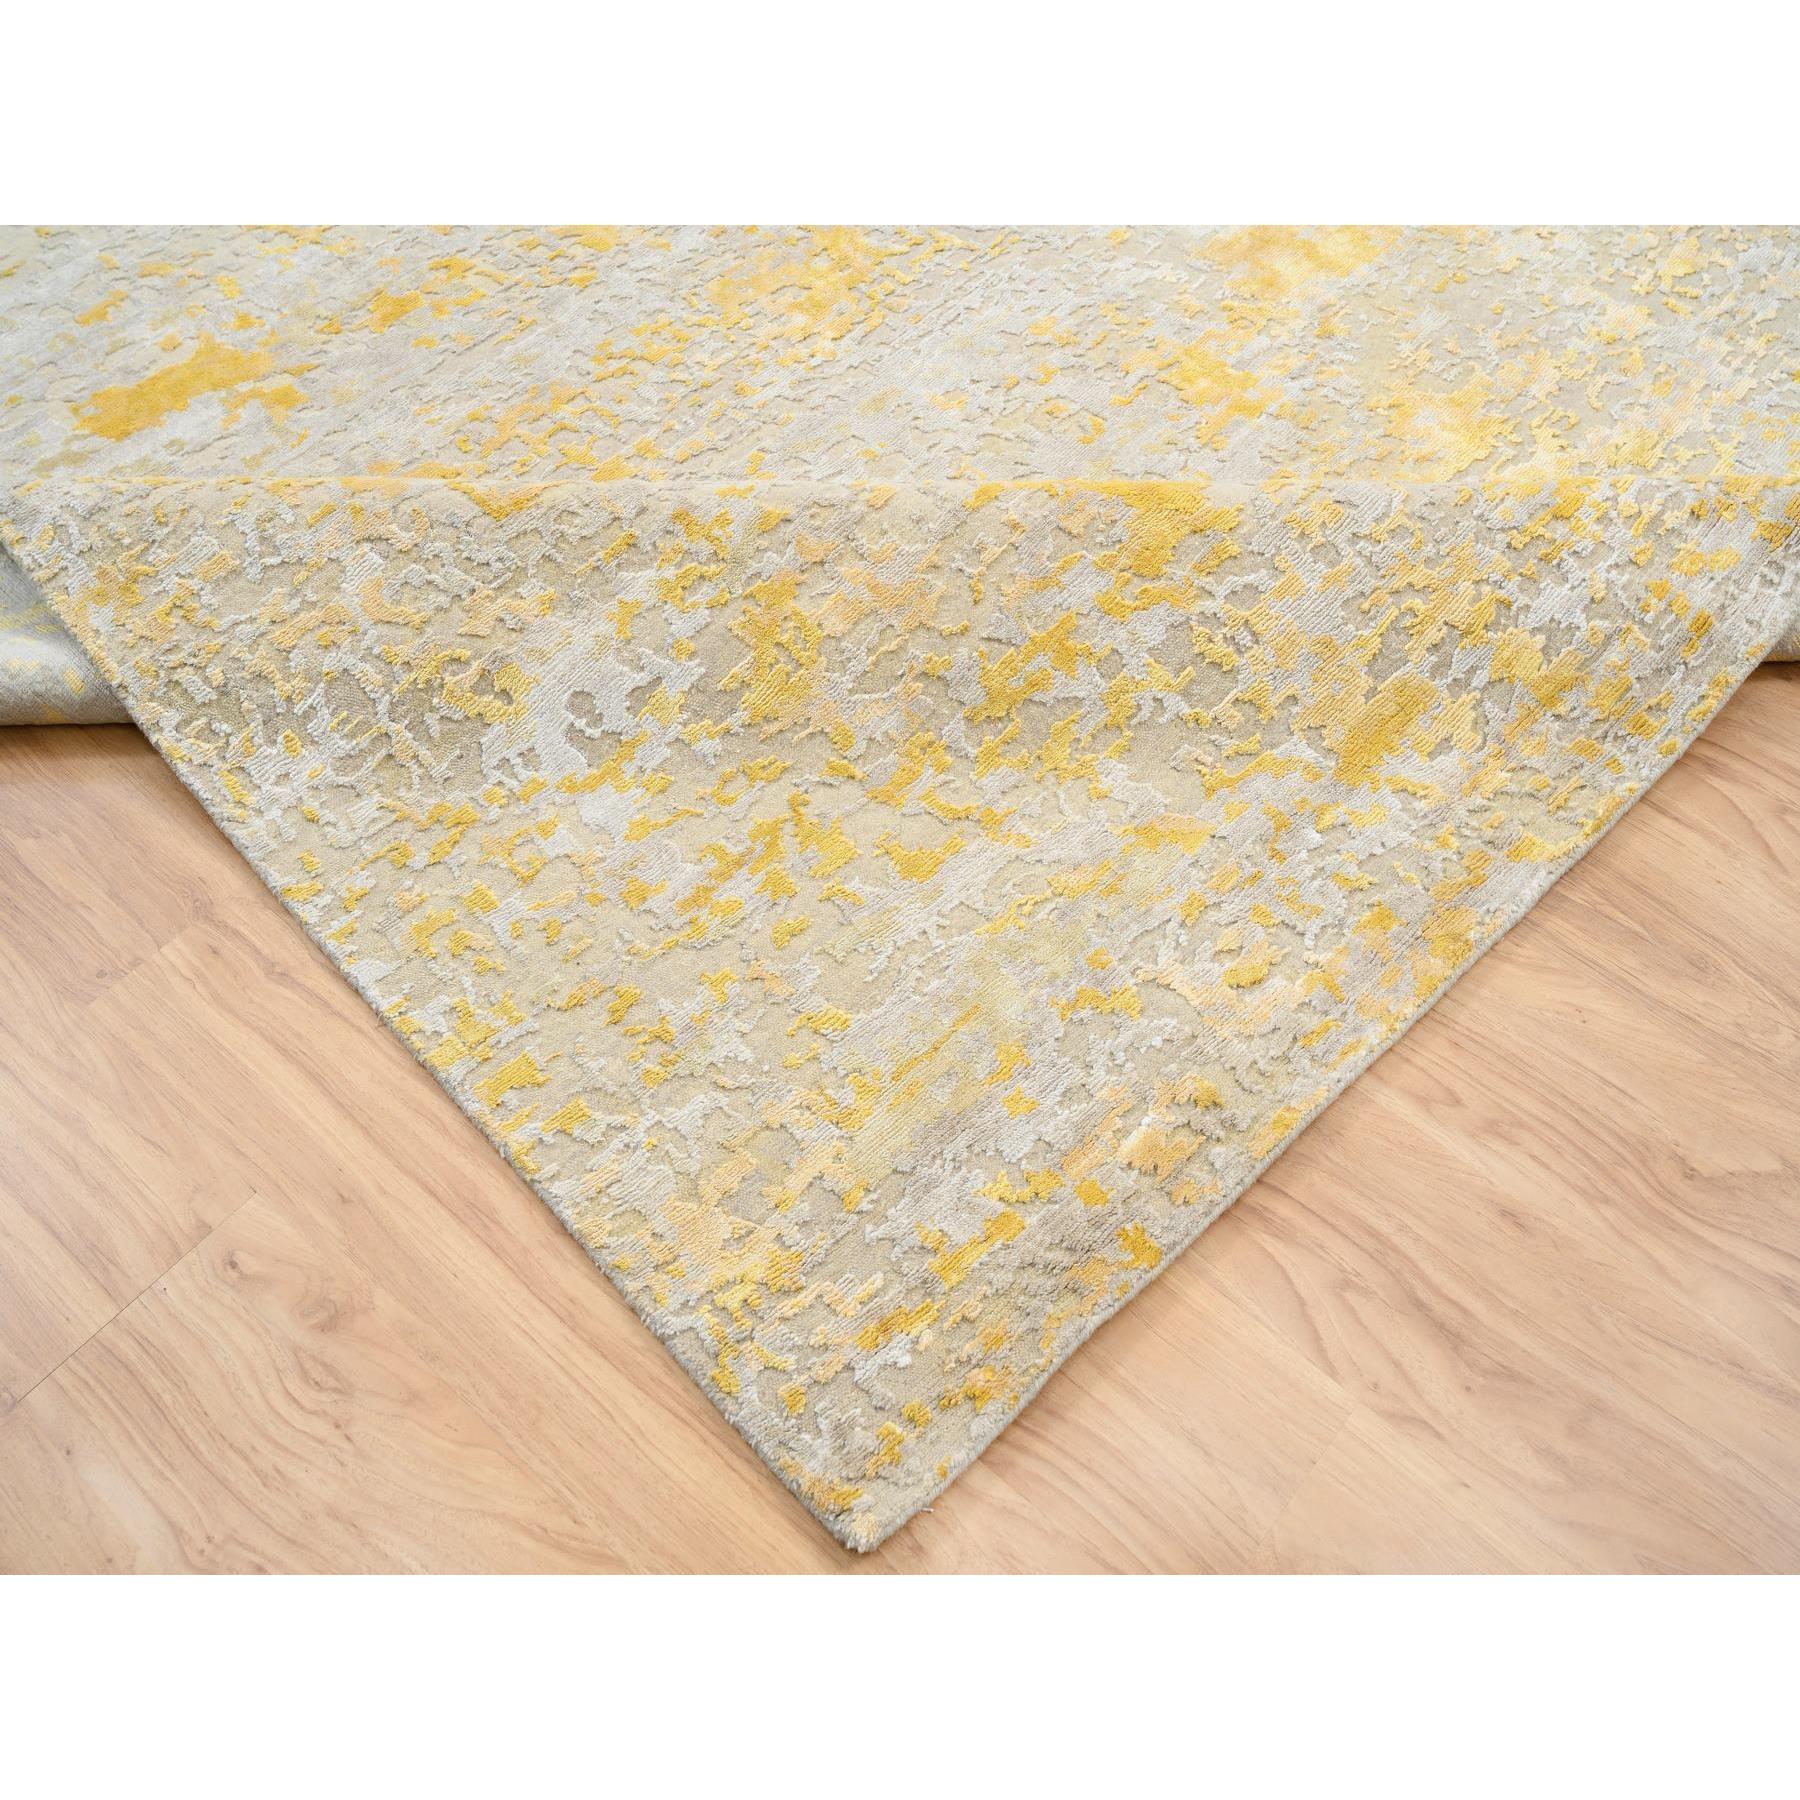 10'x13'8" Gold, Abstract Design, Hi-Low Pile, Wool and Silk, Hand Woven, Oriental Rug 